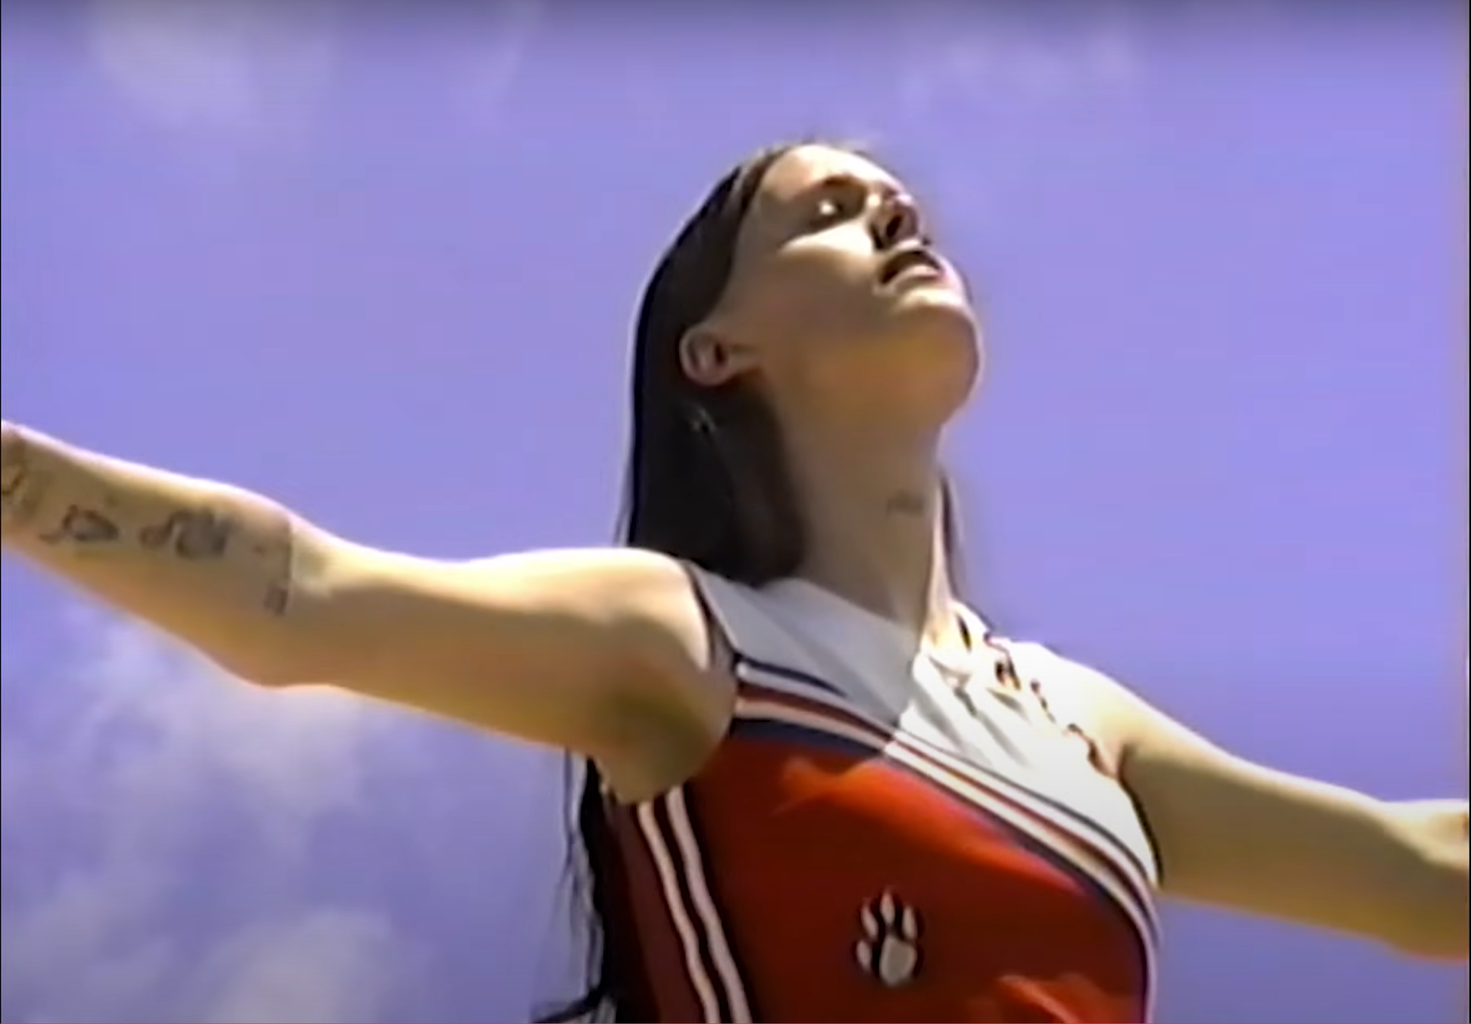 EThel Cain (young white woman) smiles while she looks up at the blue, clear sky. Her arms are extended parallel to the ground.